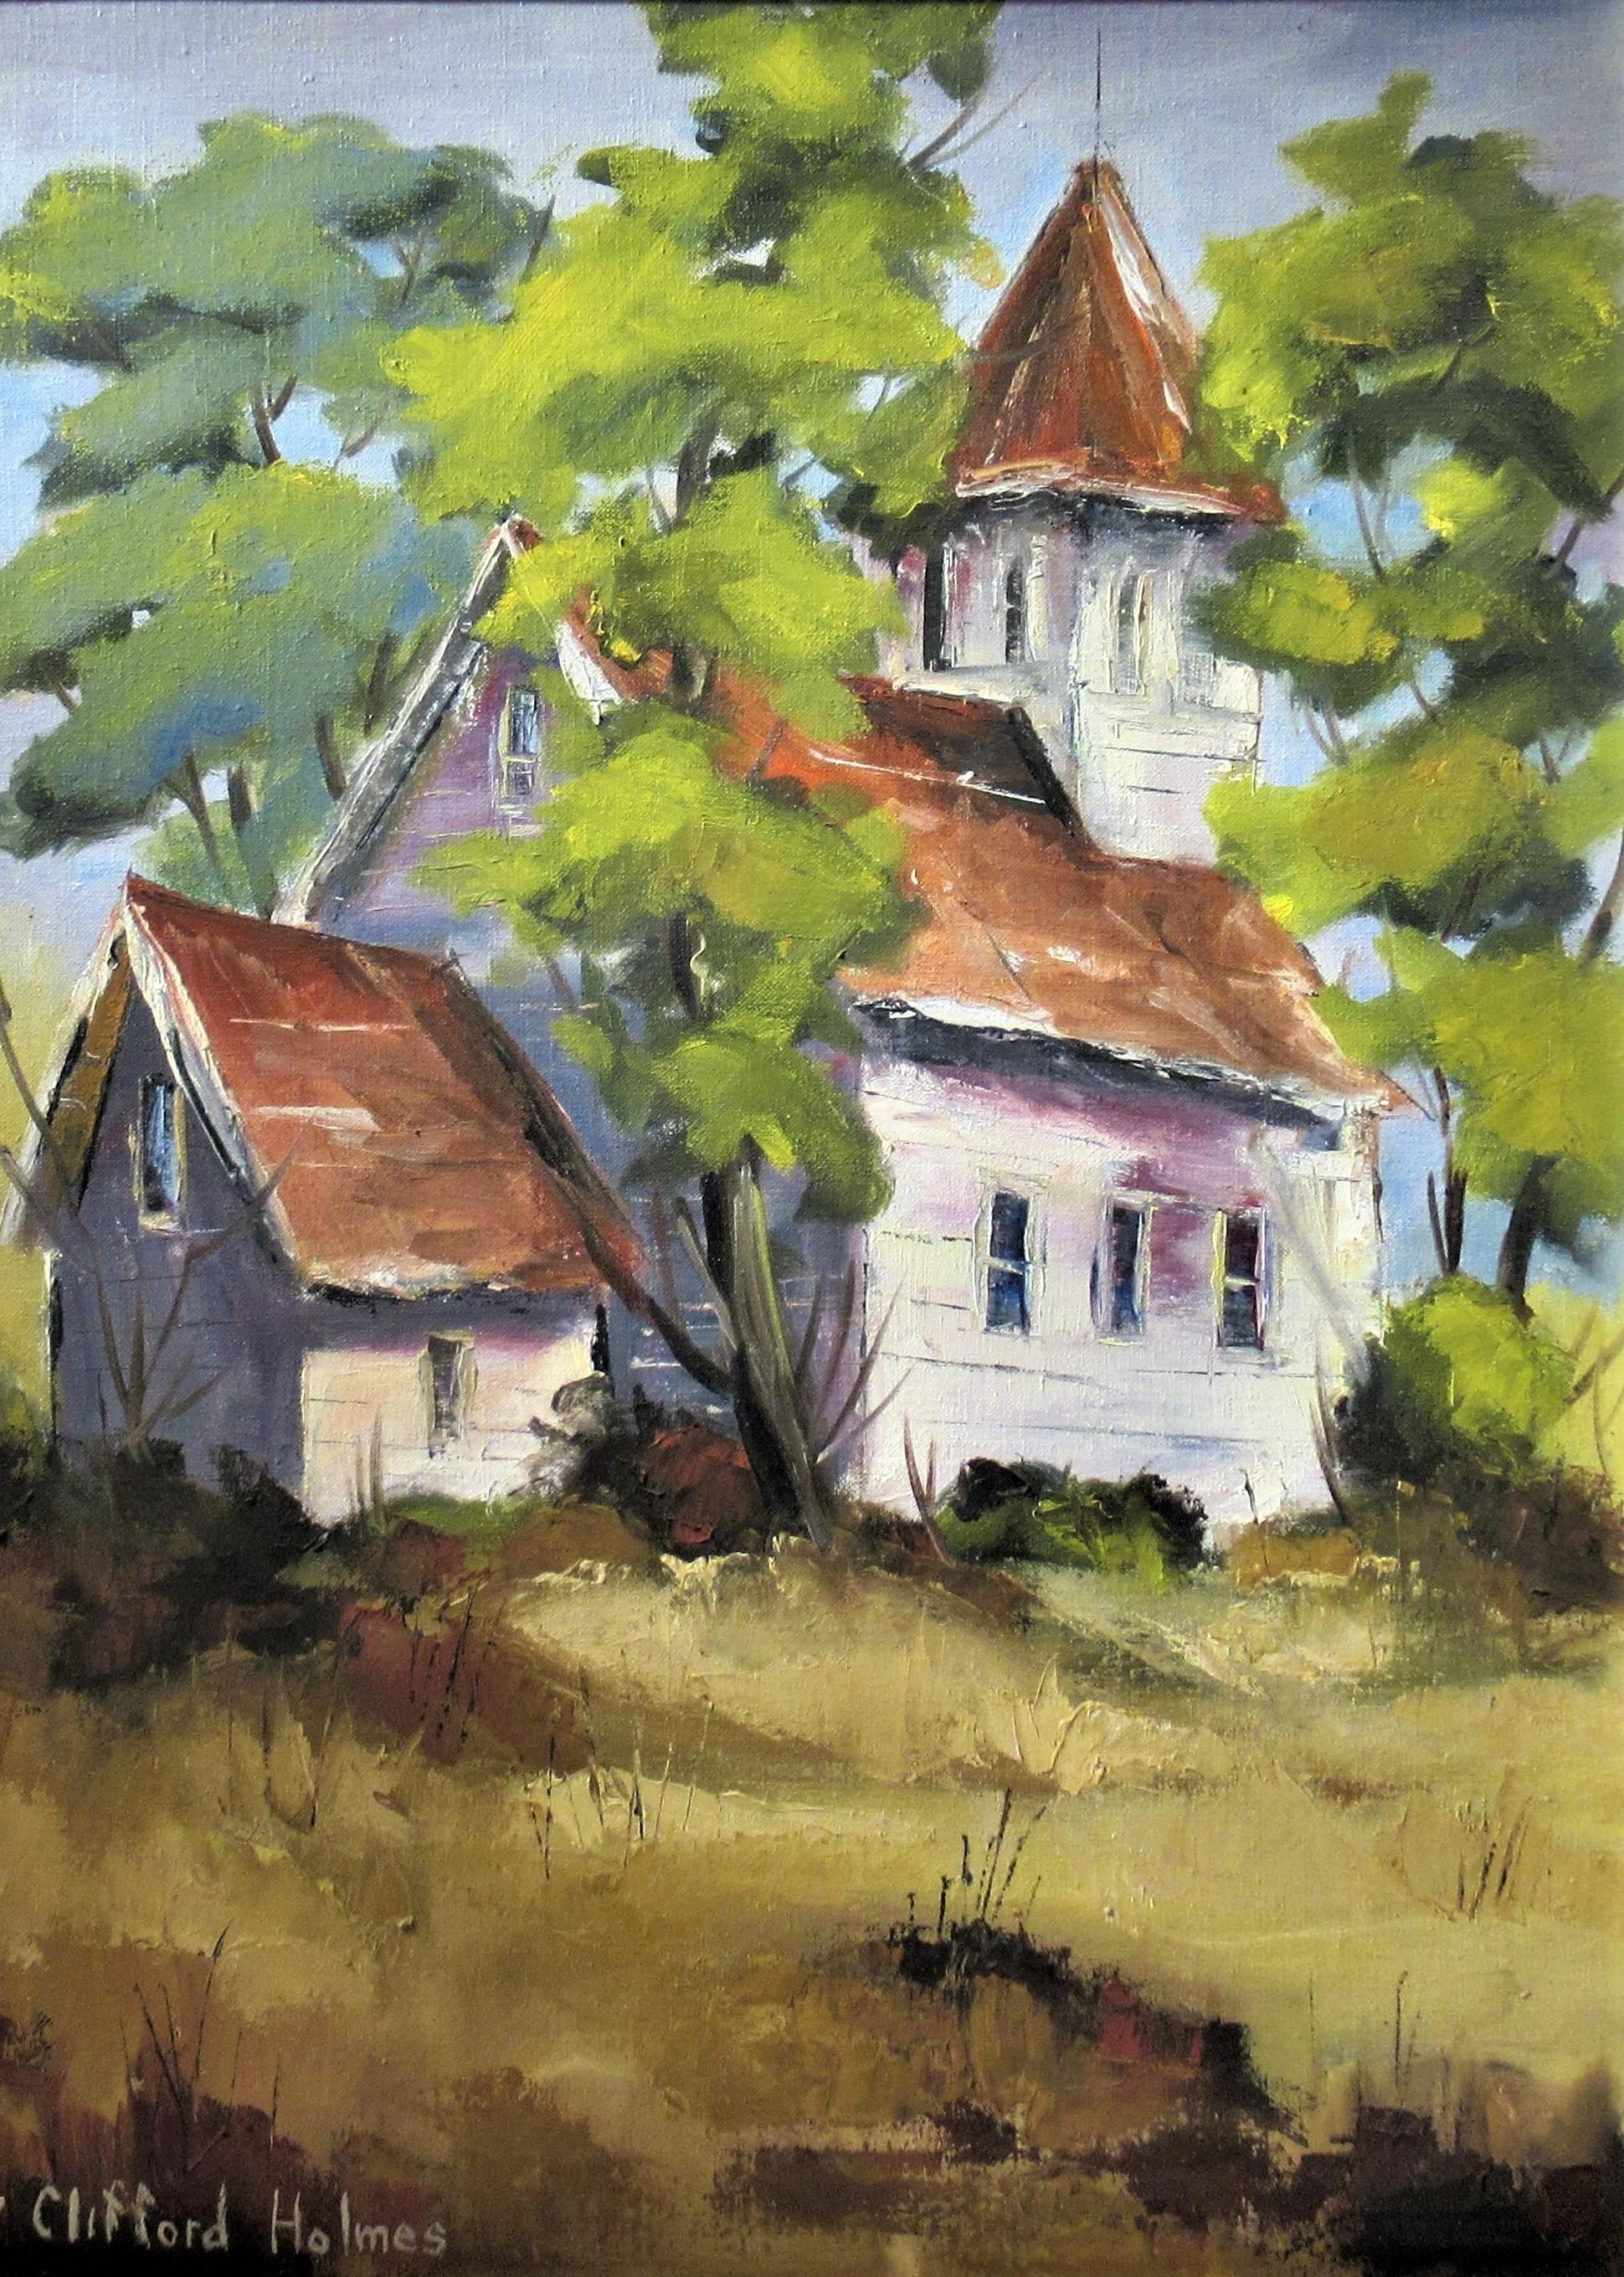 St Raymonds Church - Painting by Clifford Holmes